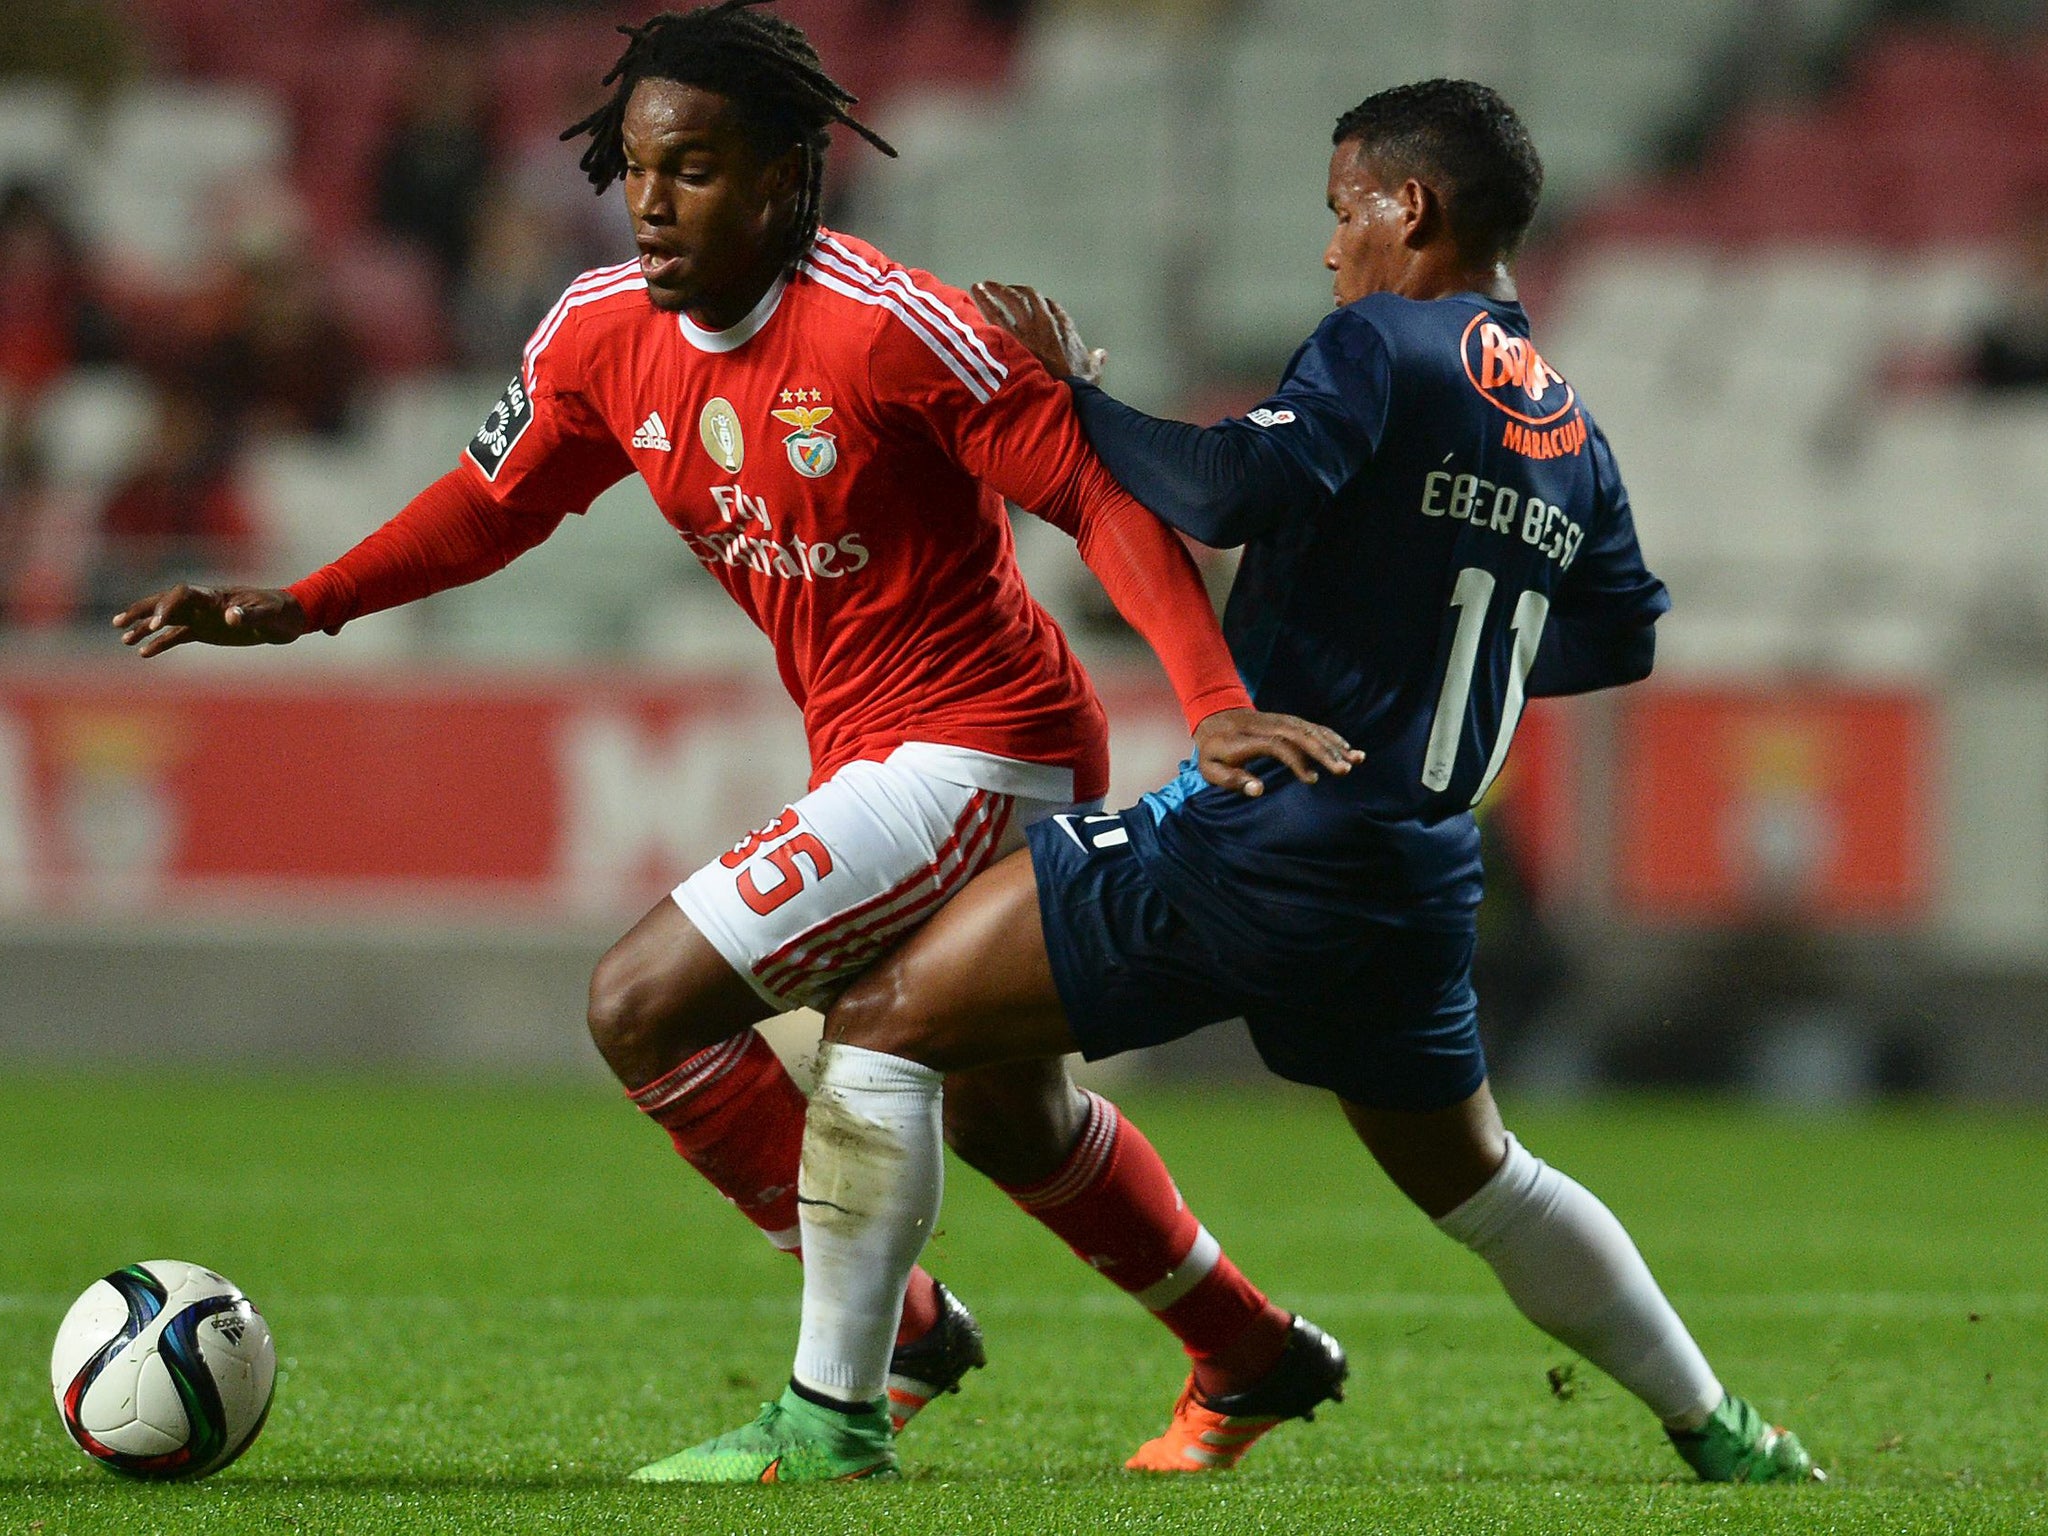 Renato Sanches in action for Benfica